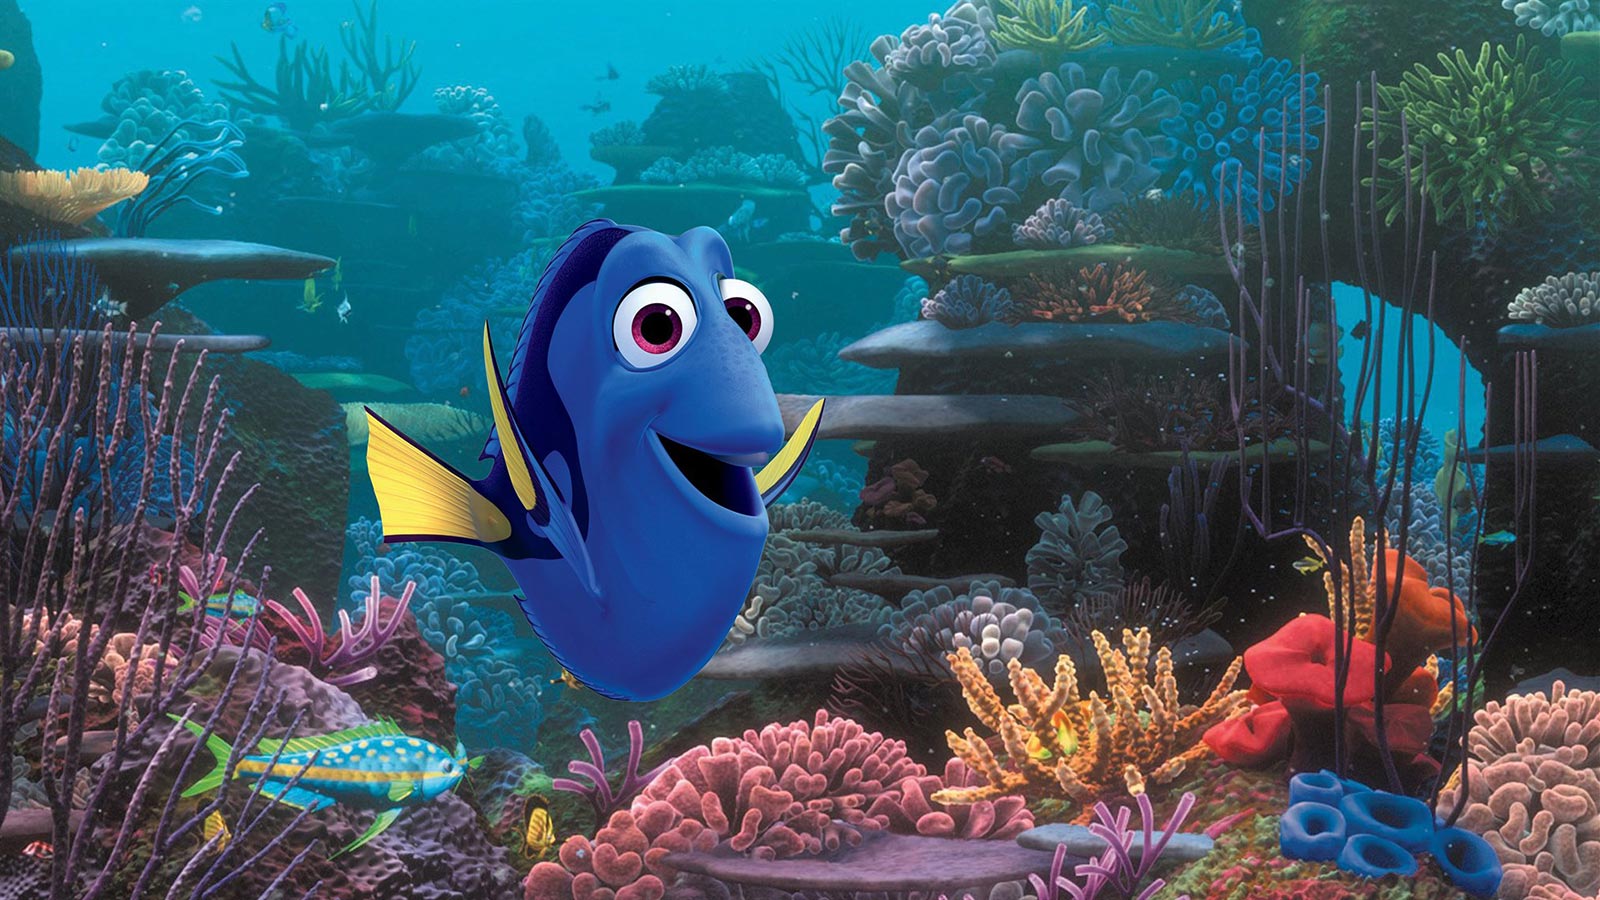 If You’ve Seen 20/39 of the Films That’ve Made Over $1 Billion, You’re a Real Movie Buff Finding Dory 2016